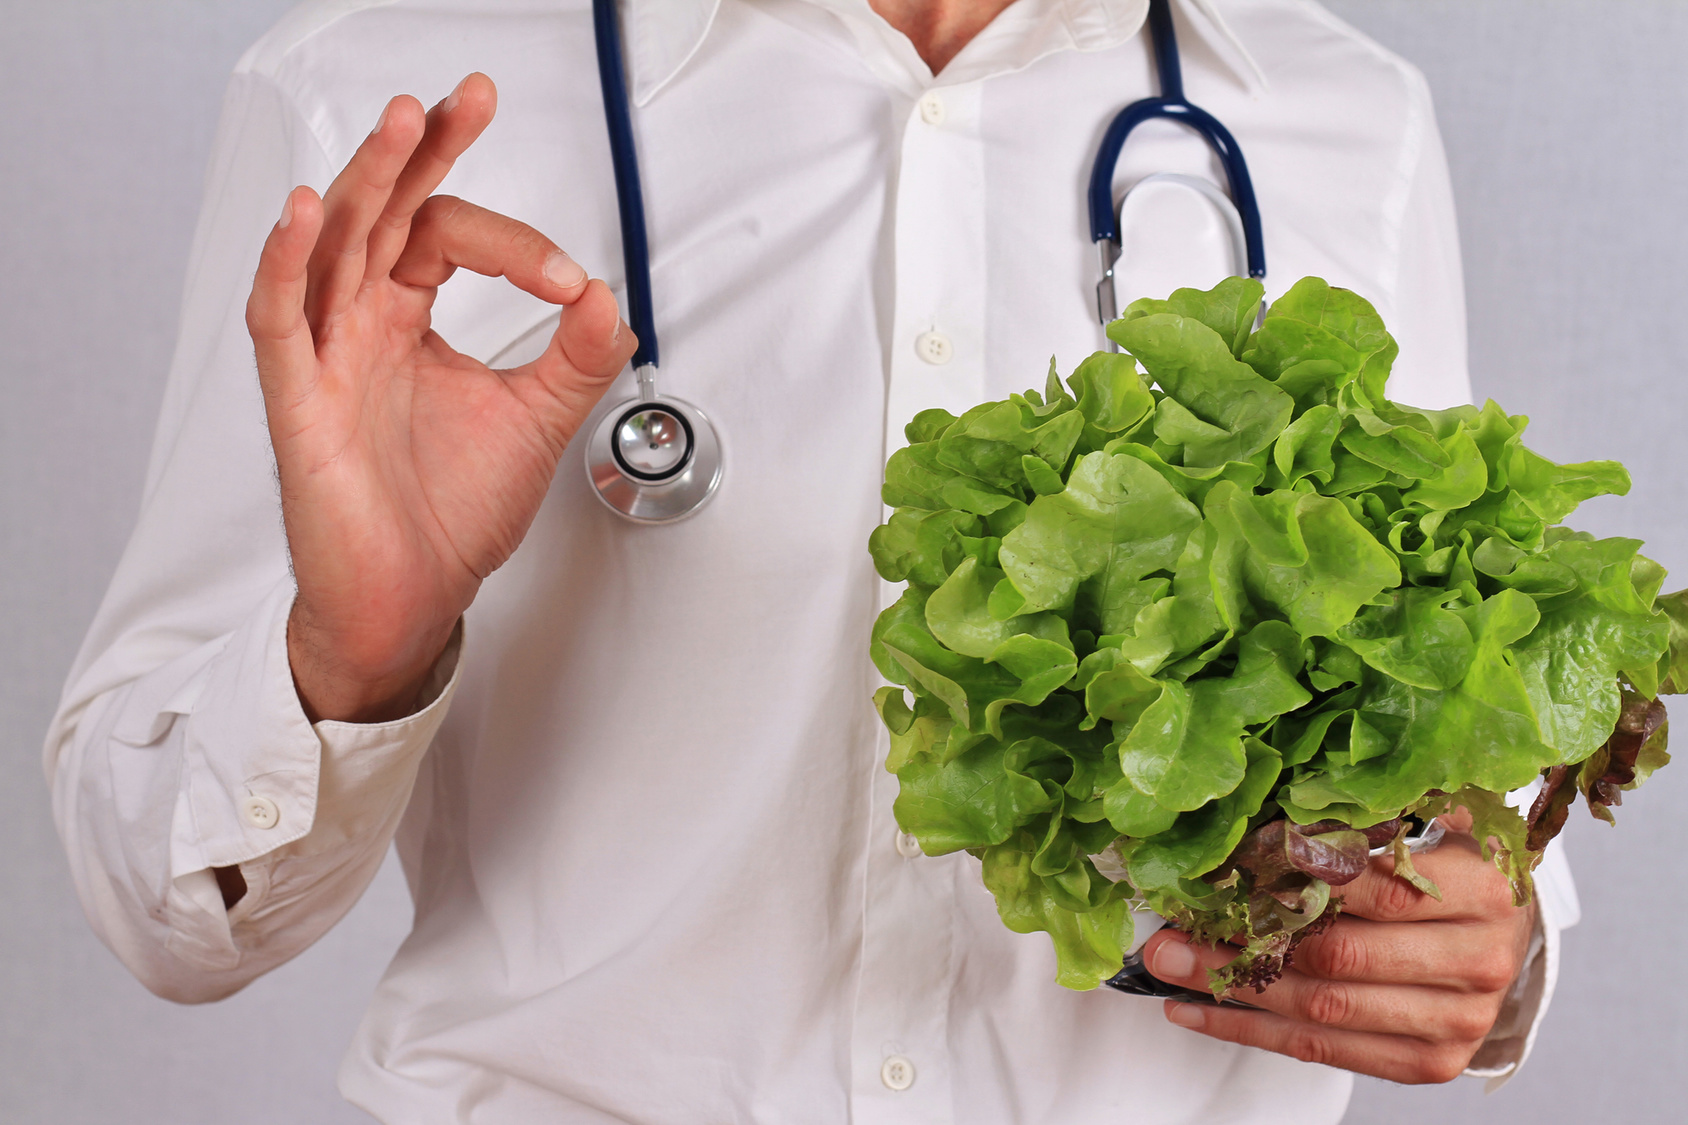 Doctor recommended green salad, health care concept